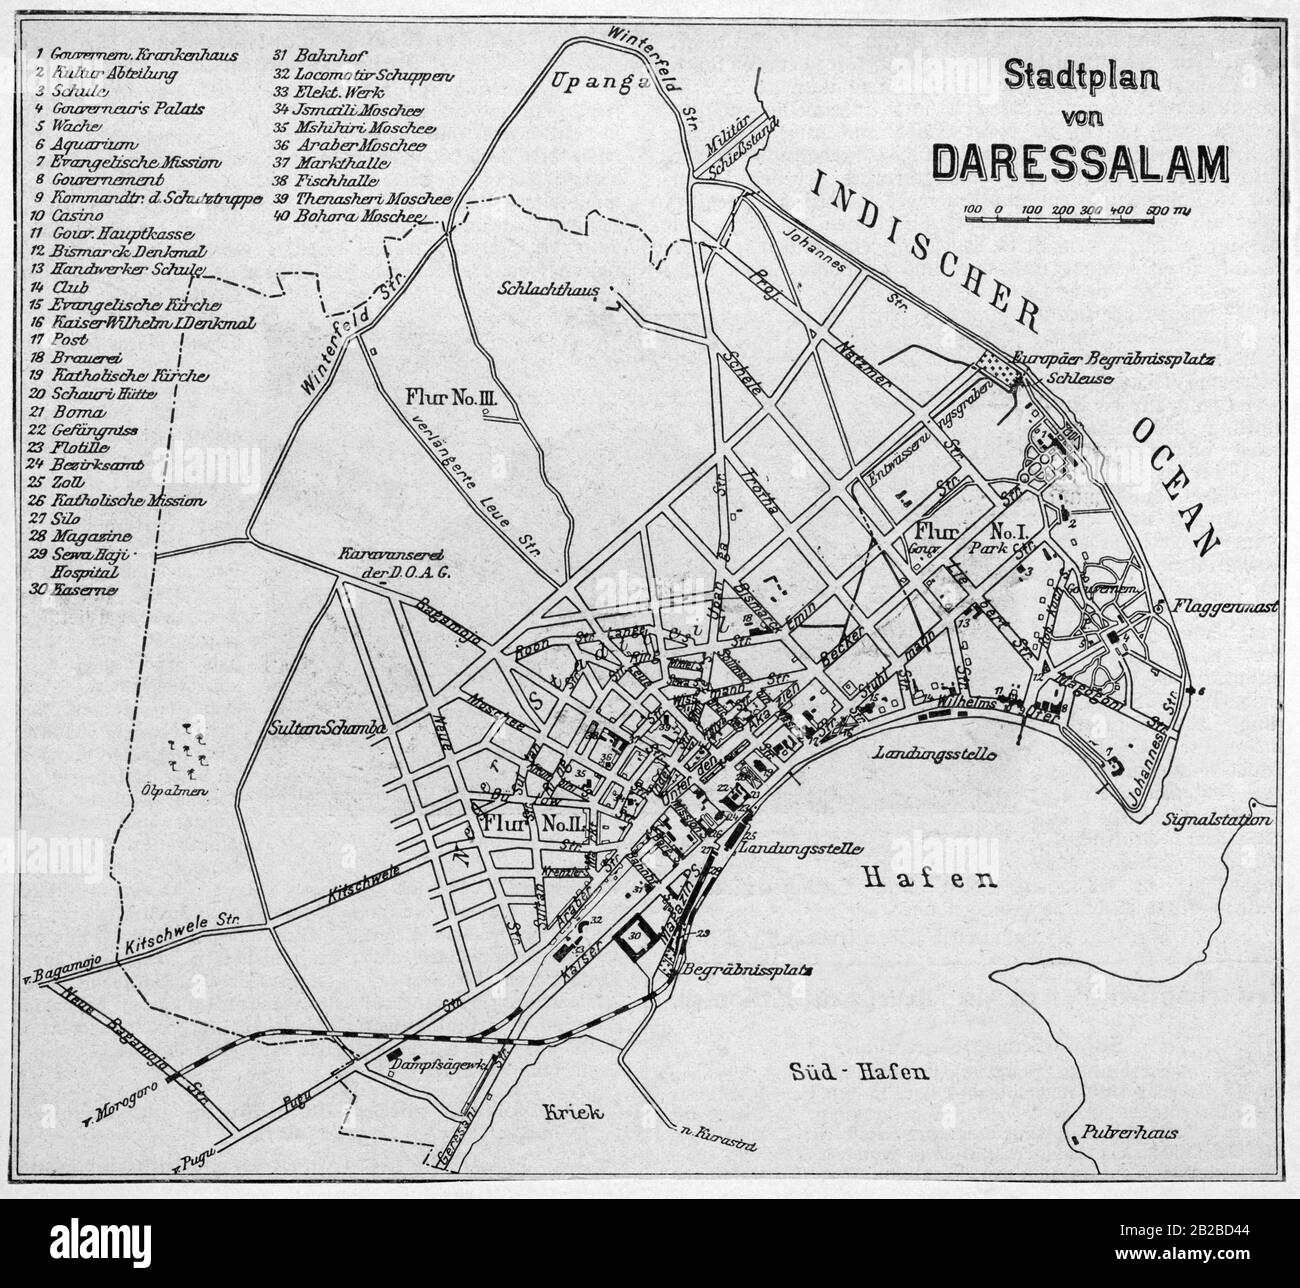 A German-language city map of the former capital of German East Africa Dar es Salaam, in today's Tanzania. Stock Photo